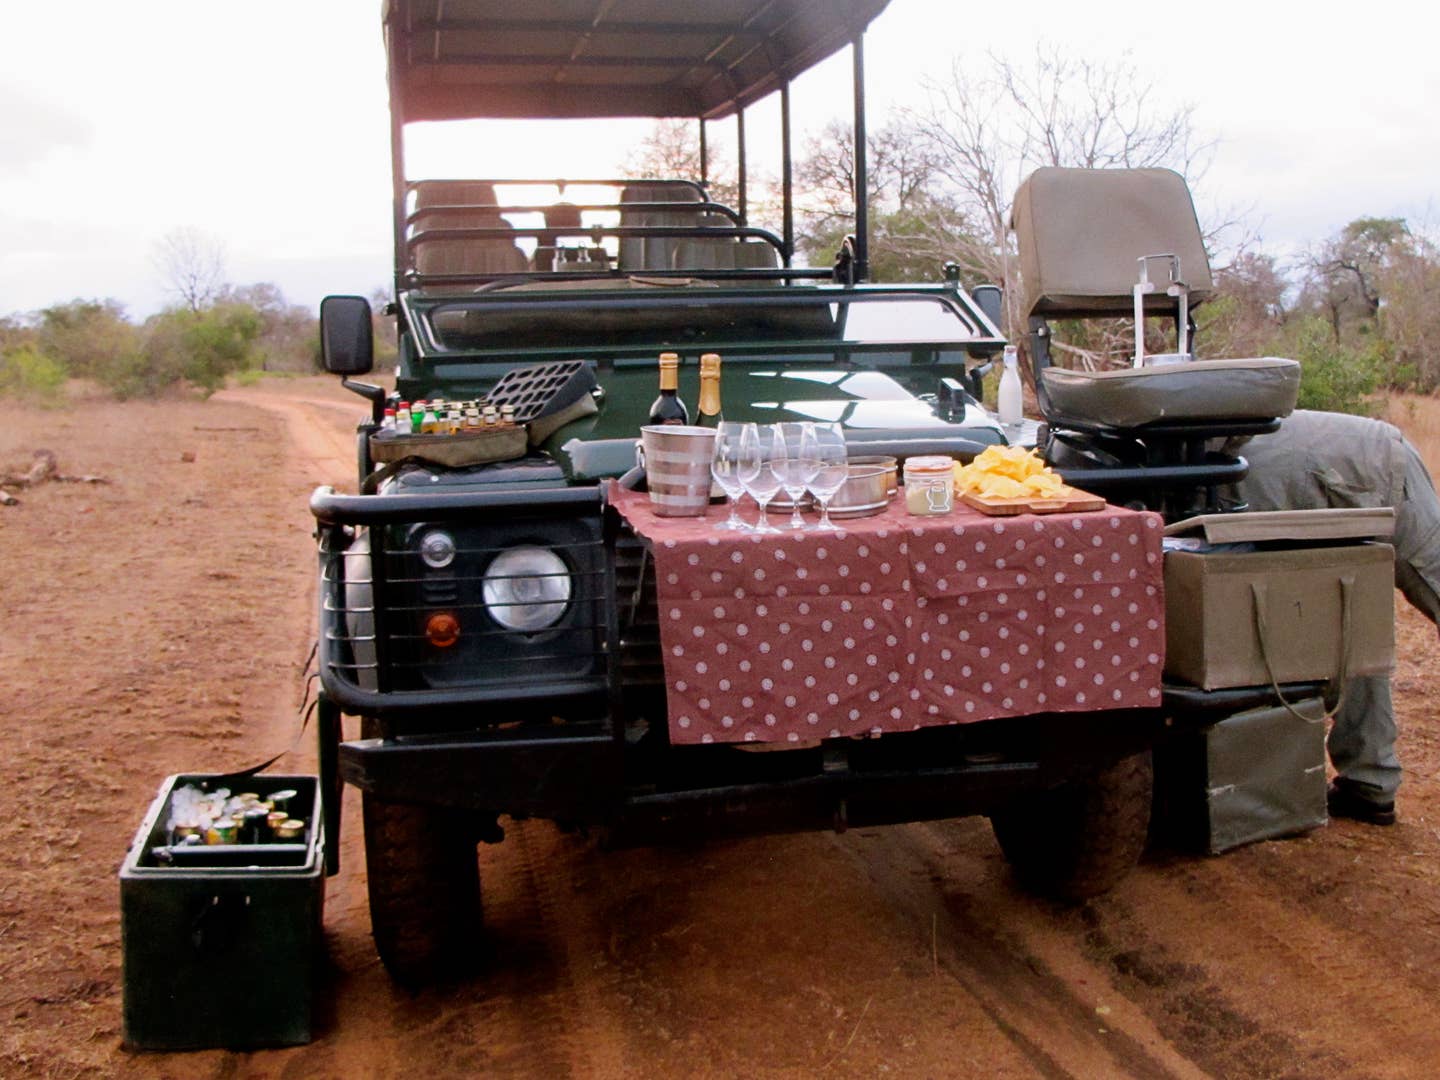 How to Toast the End of Your South African Safari